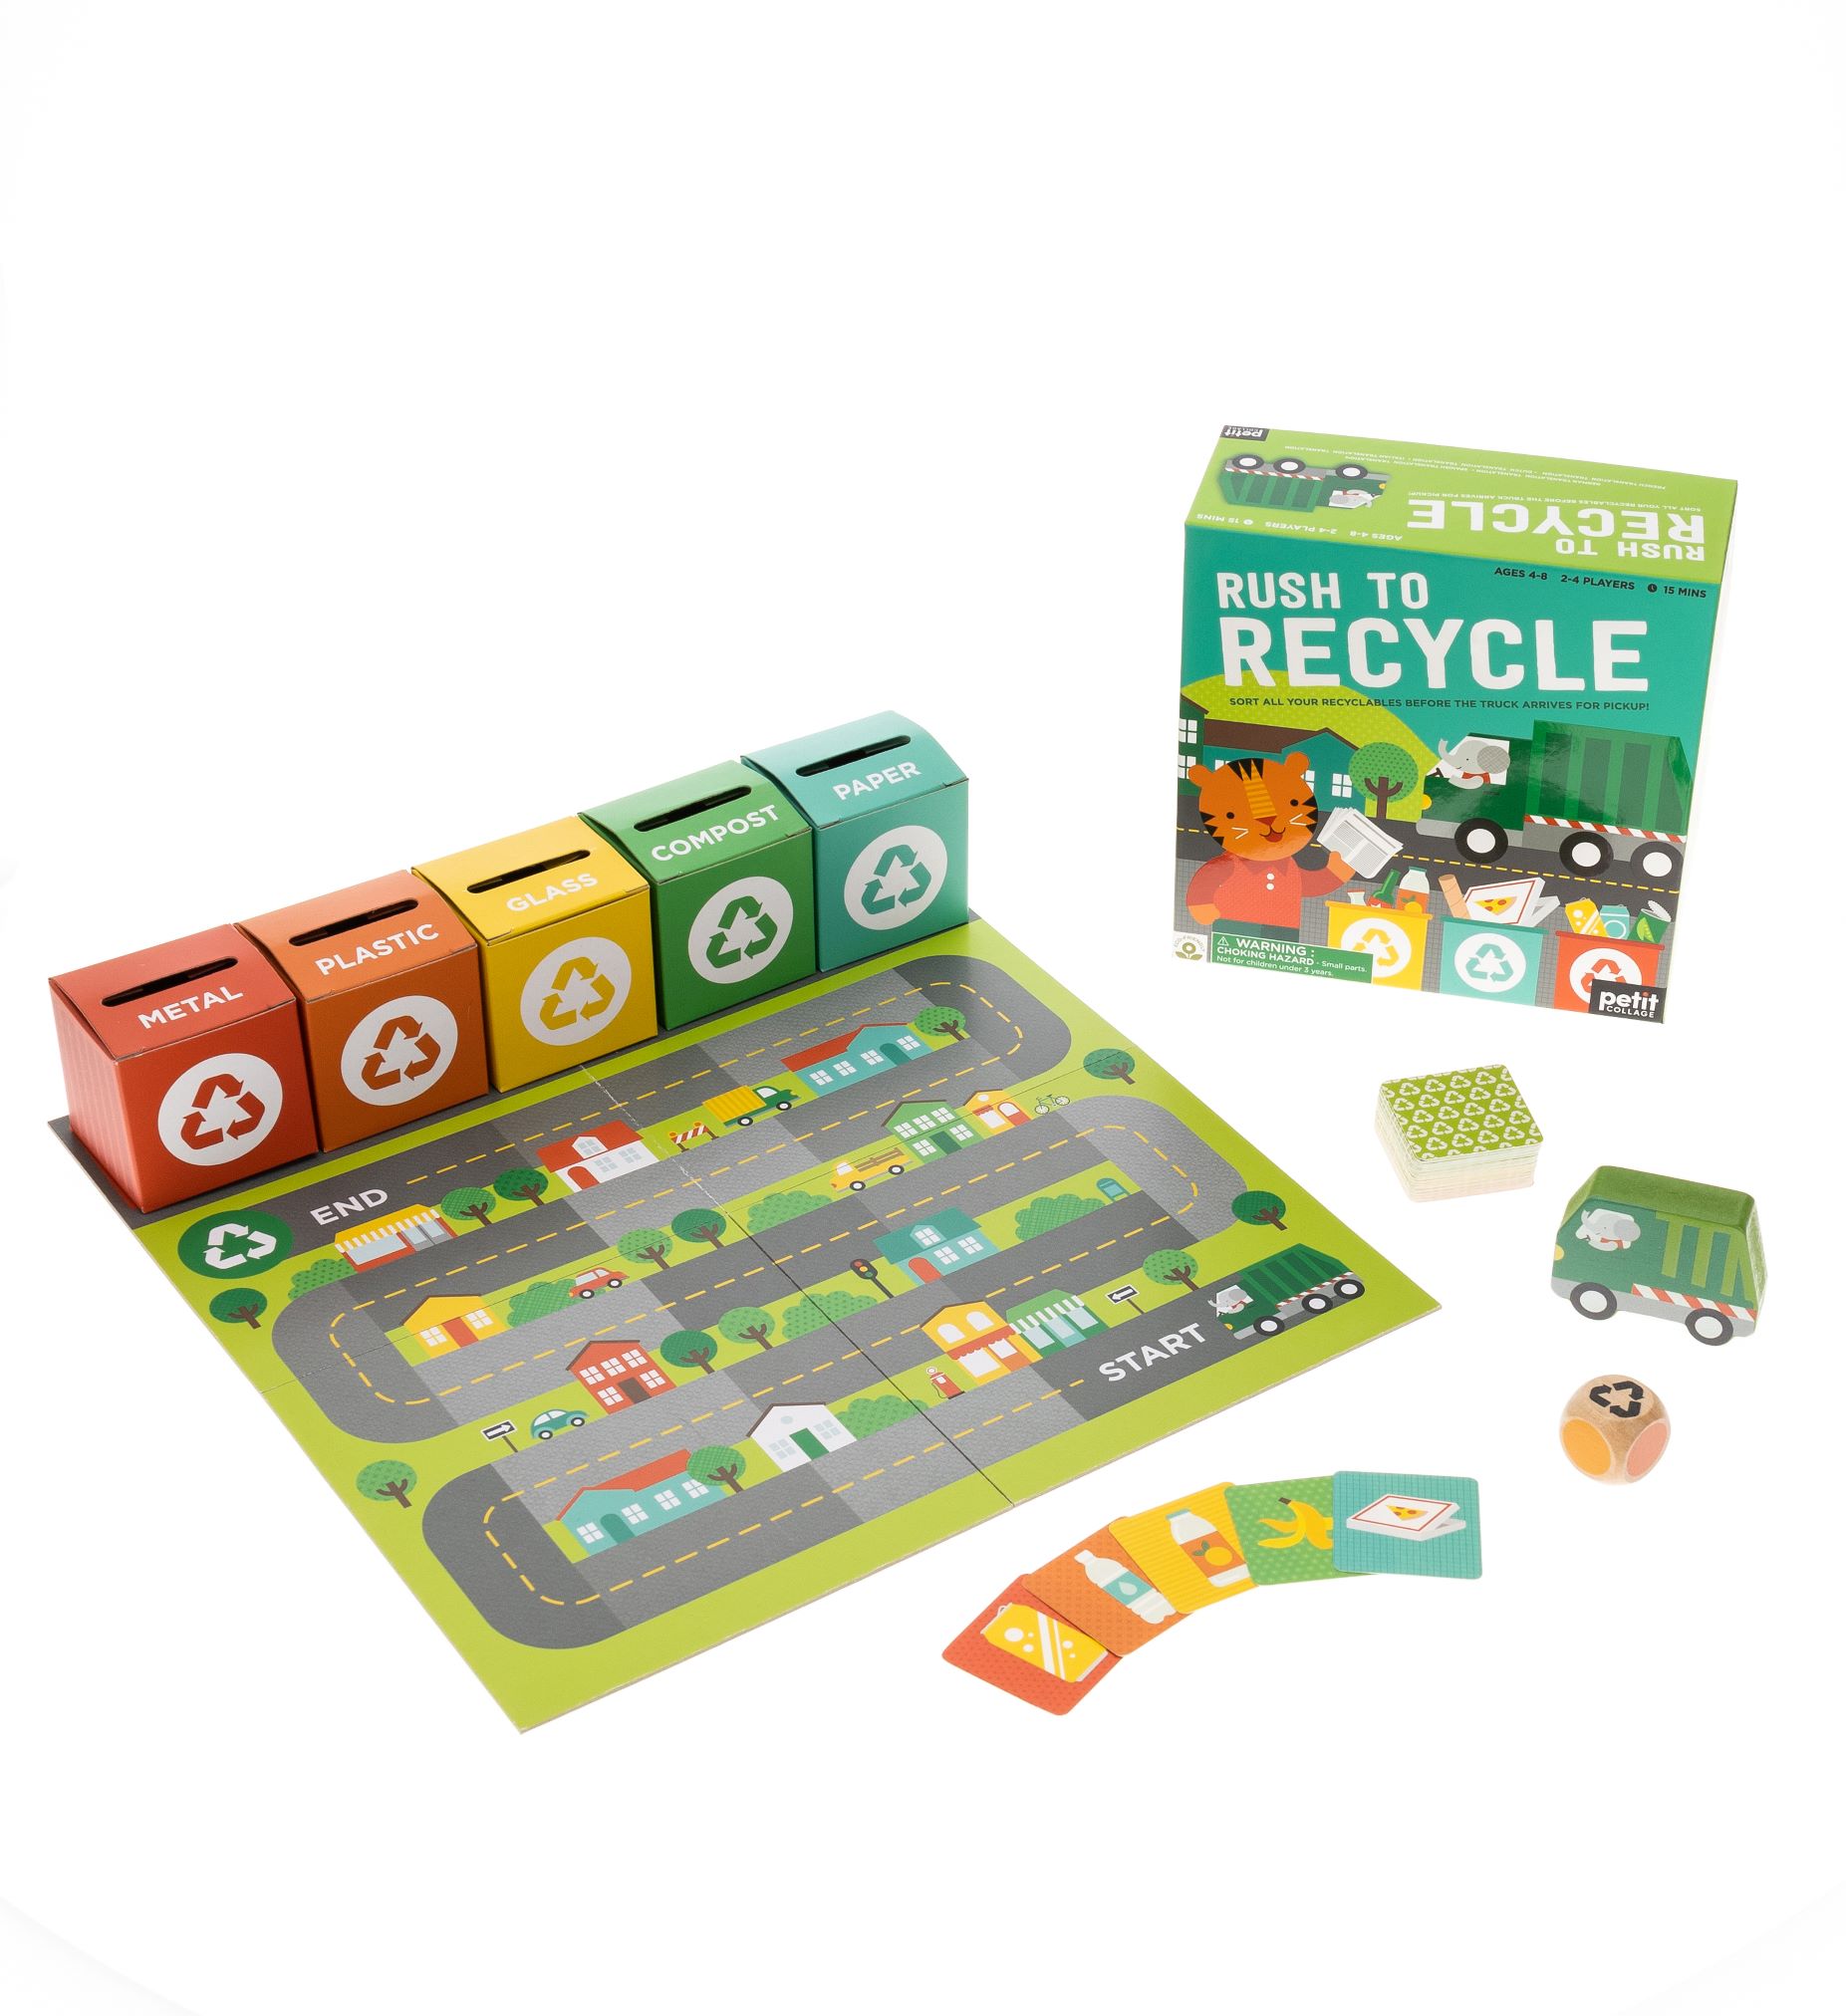 Rush to Recycle - Game